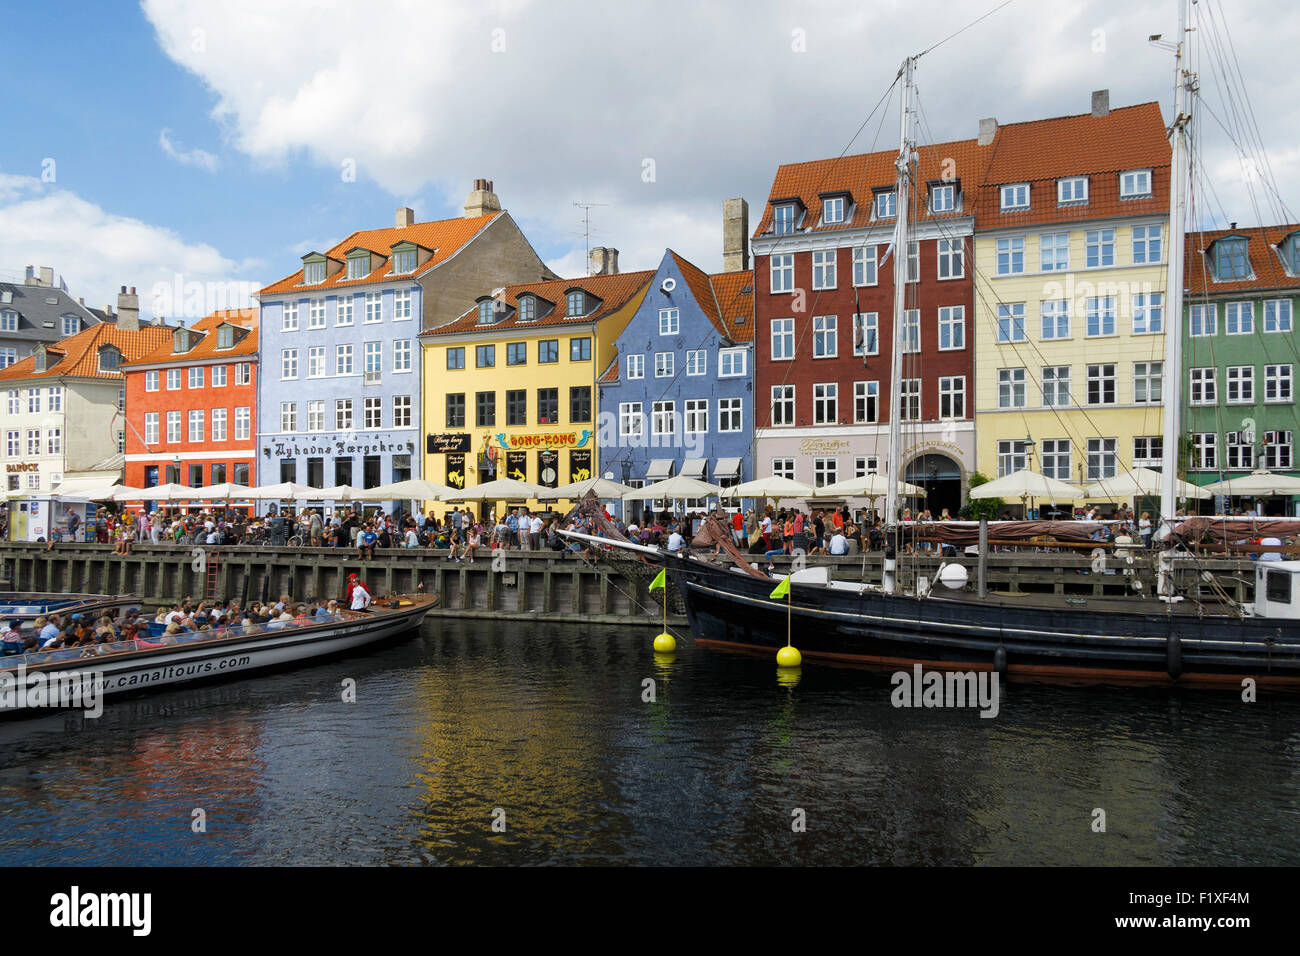 Row of colorful houses on the waterfront of the Nyhavn canal in Copenhagen, Denmark Stock Photo